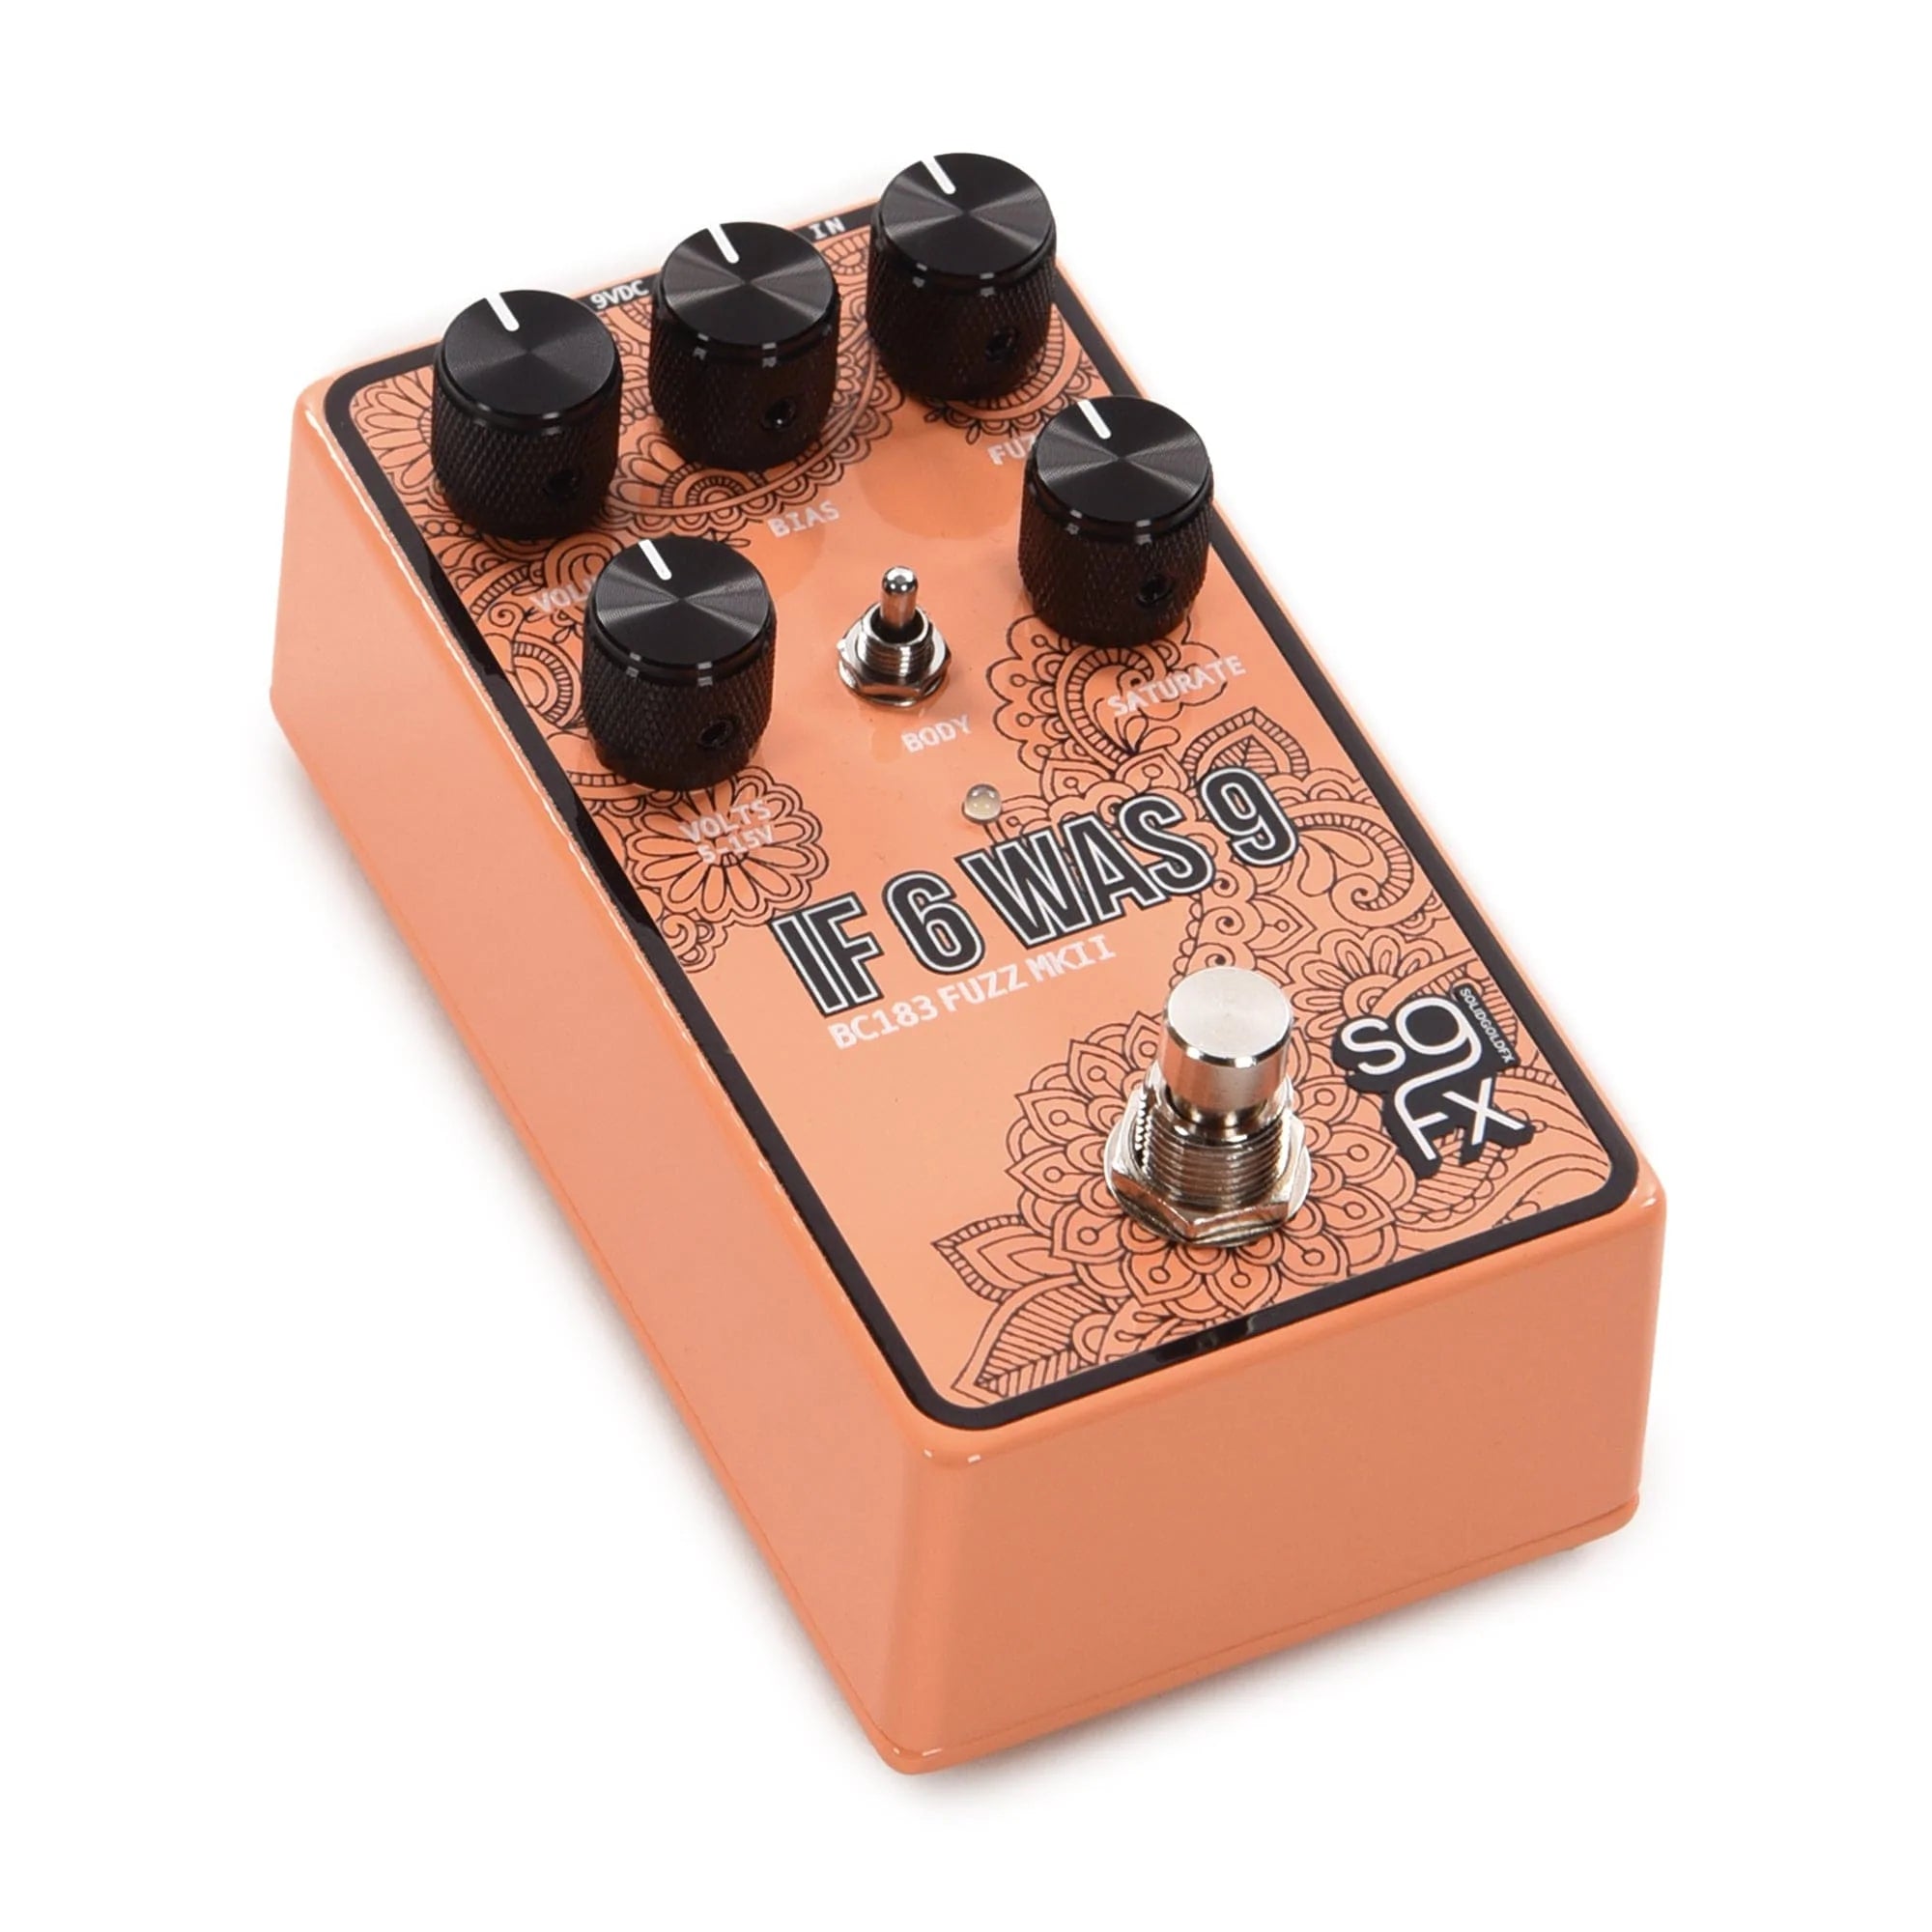 SolidGoldFX If 6 Was 9 mkII BC183 Fuzz Pedal Pacific Peach Effects and Pedals / Fuzz